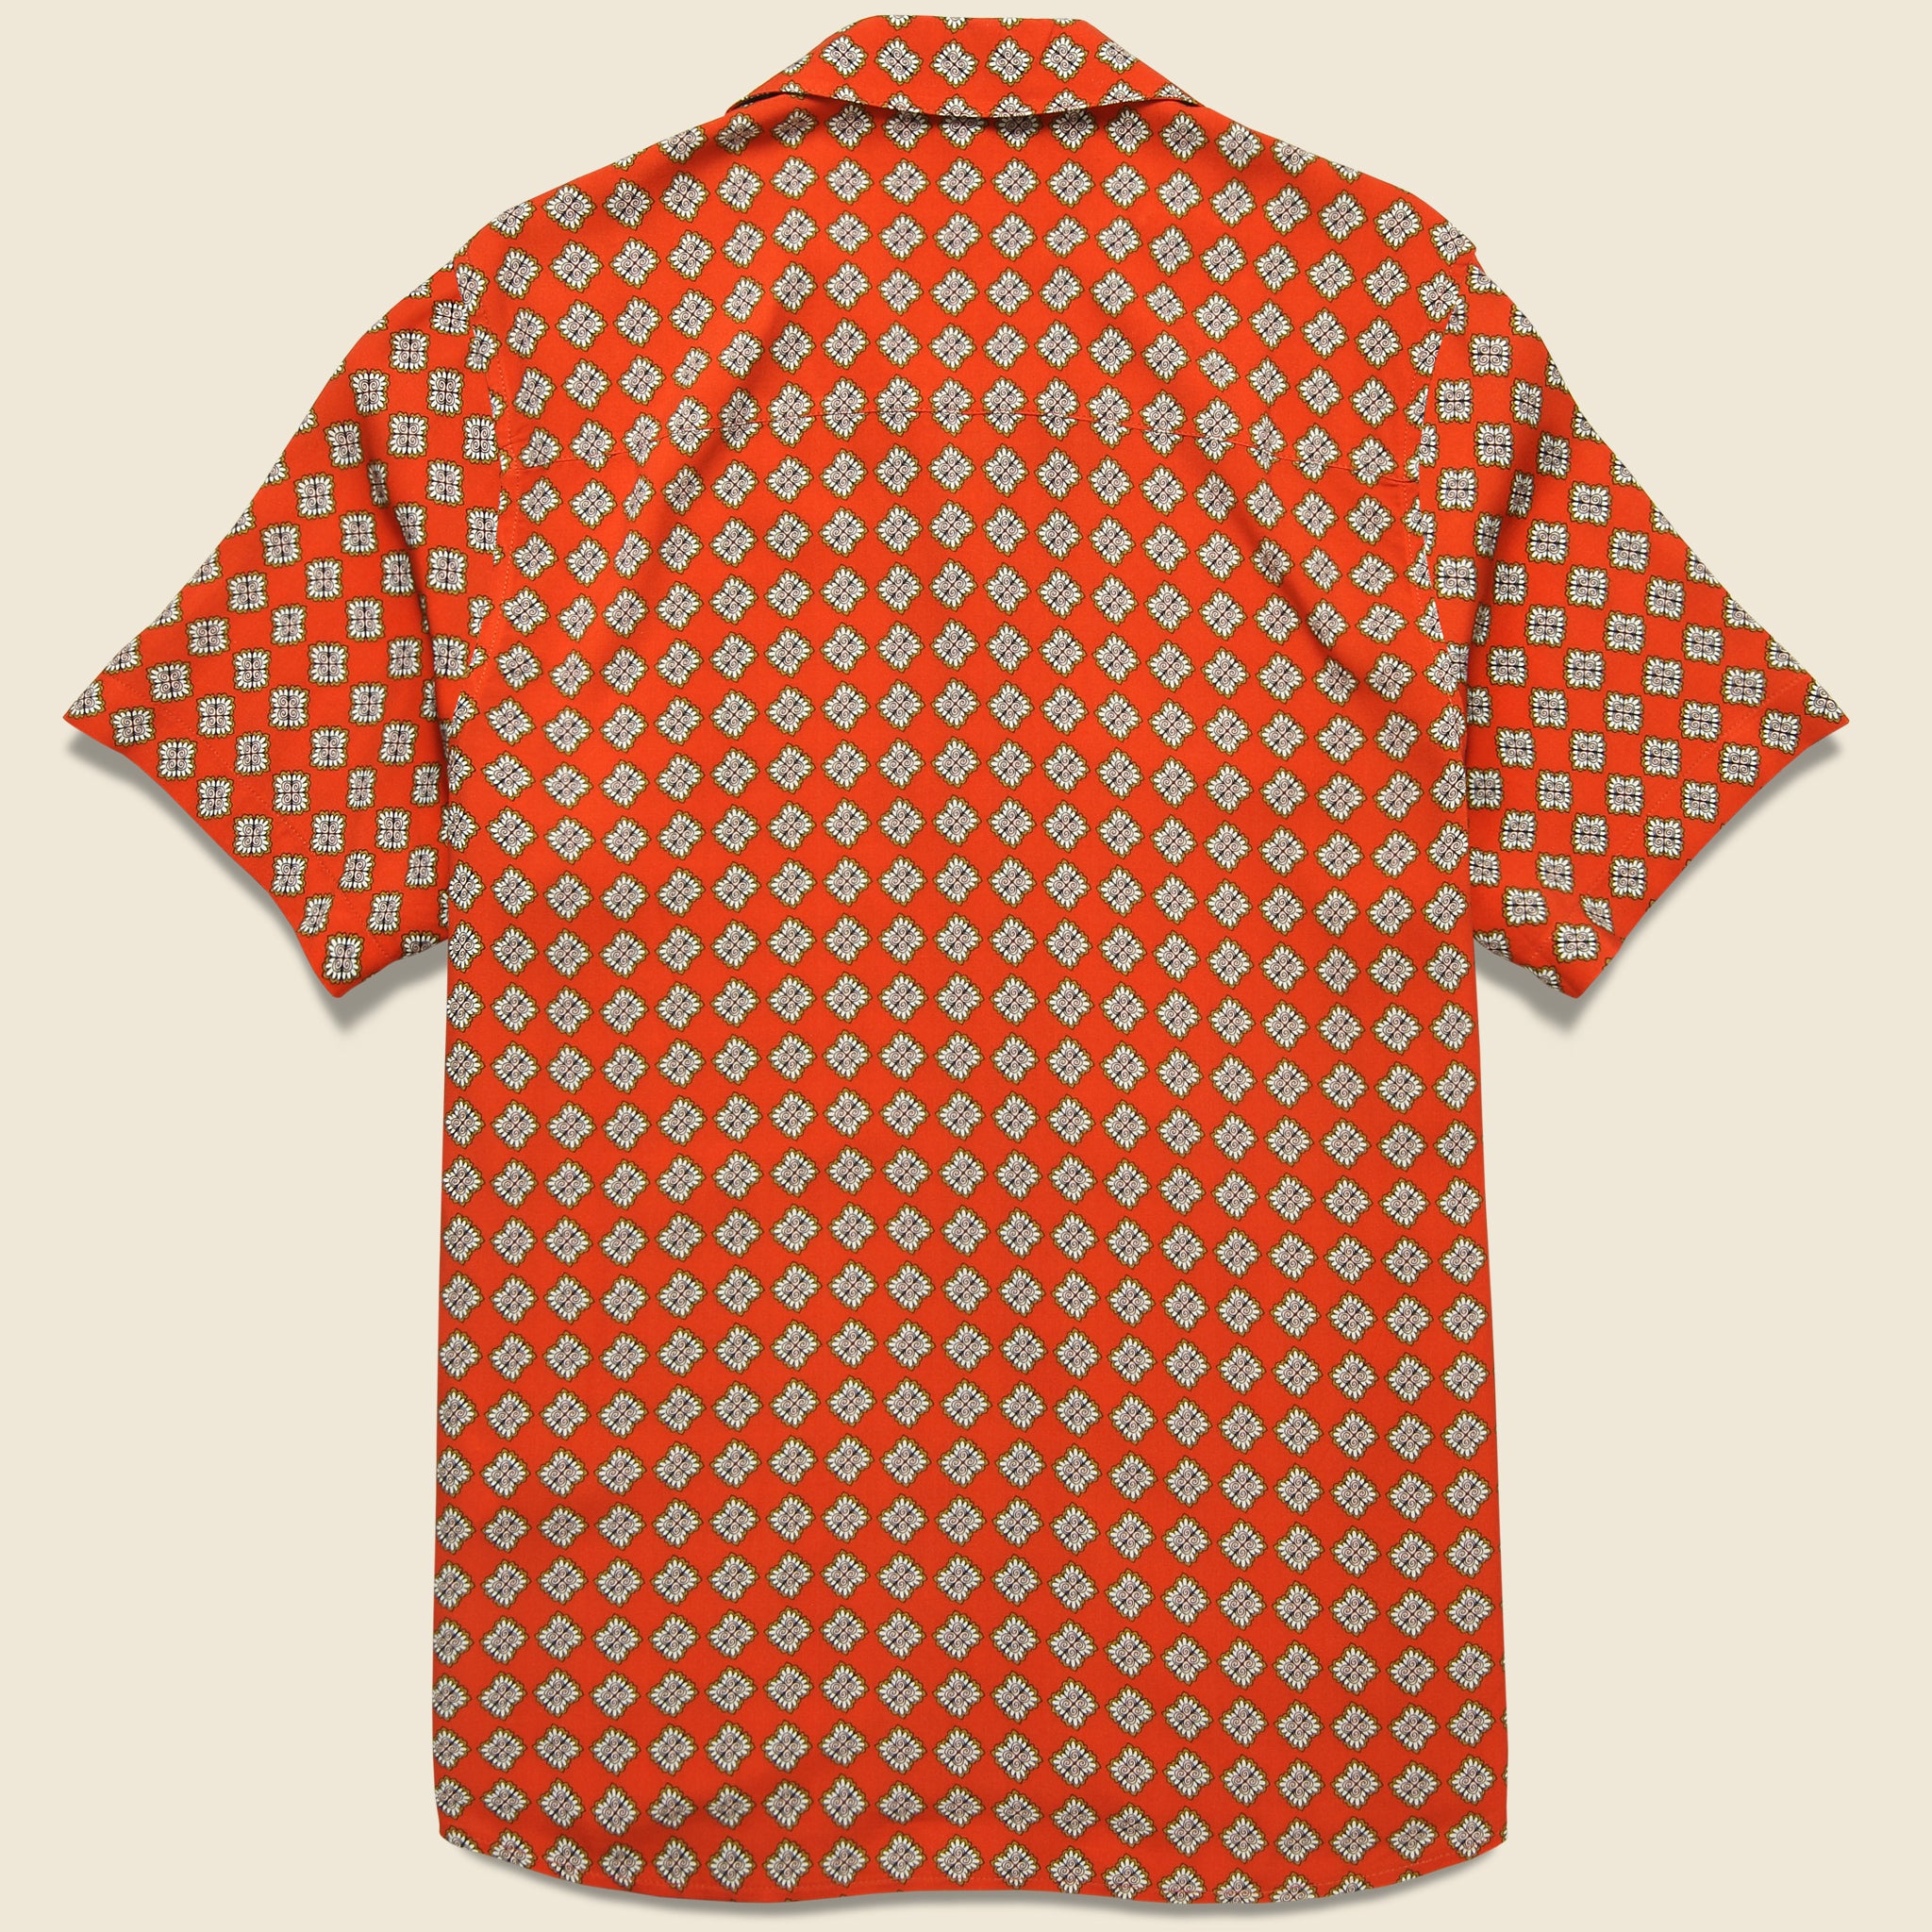 Didcot Shirt - Amalfi Red - Wax London - STAG Provisions - Tops - S/S Woven - Other Pattern